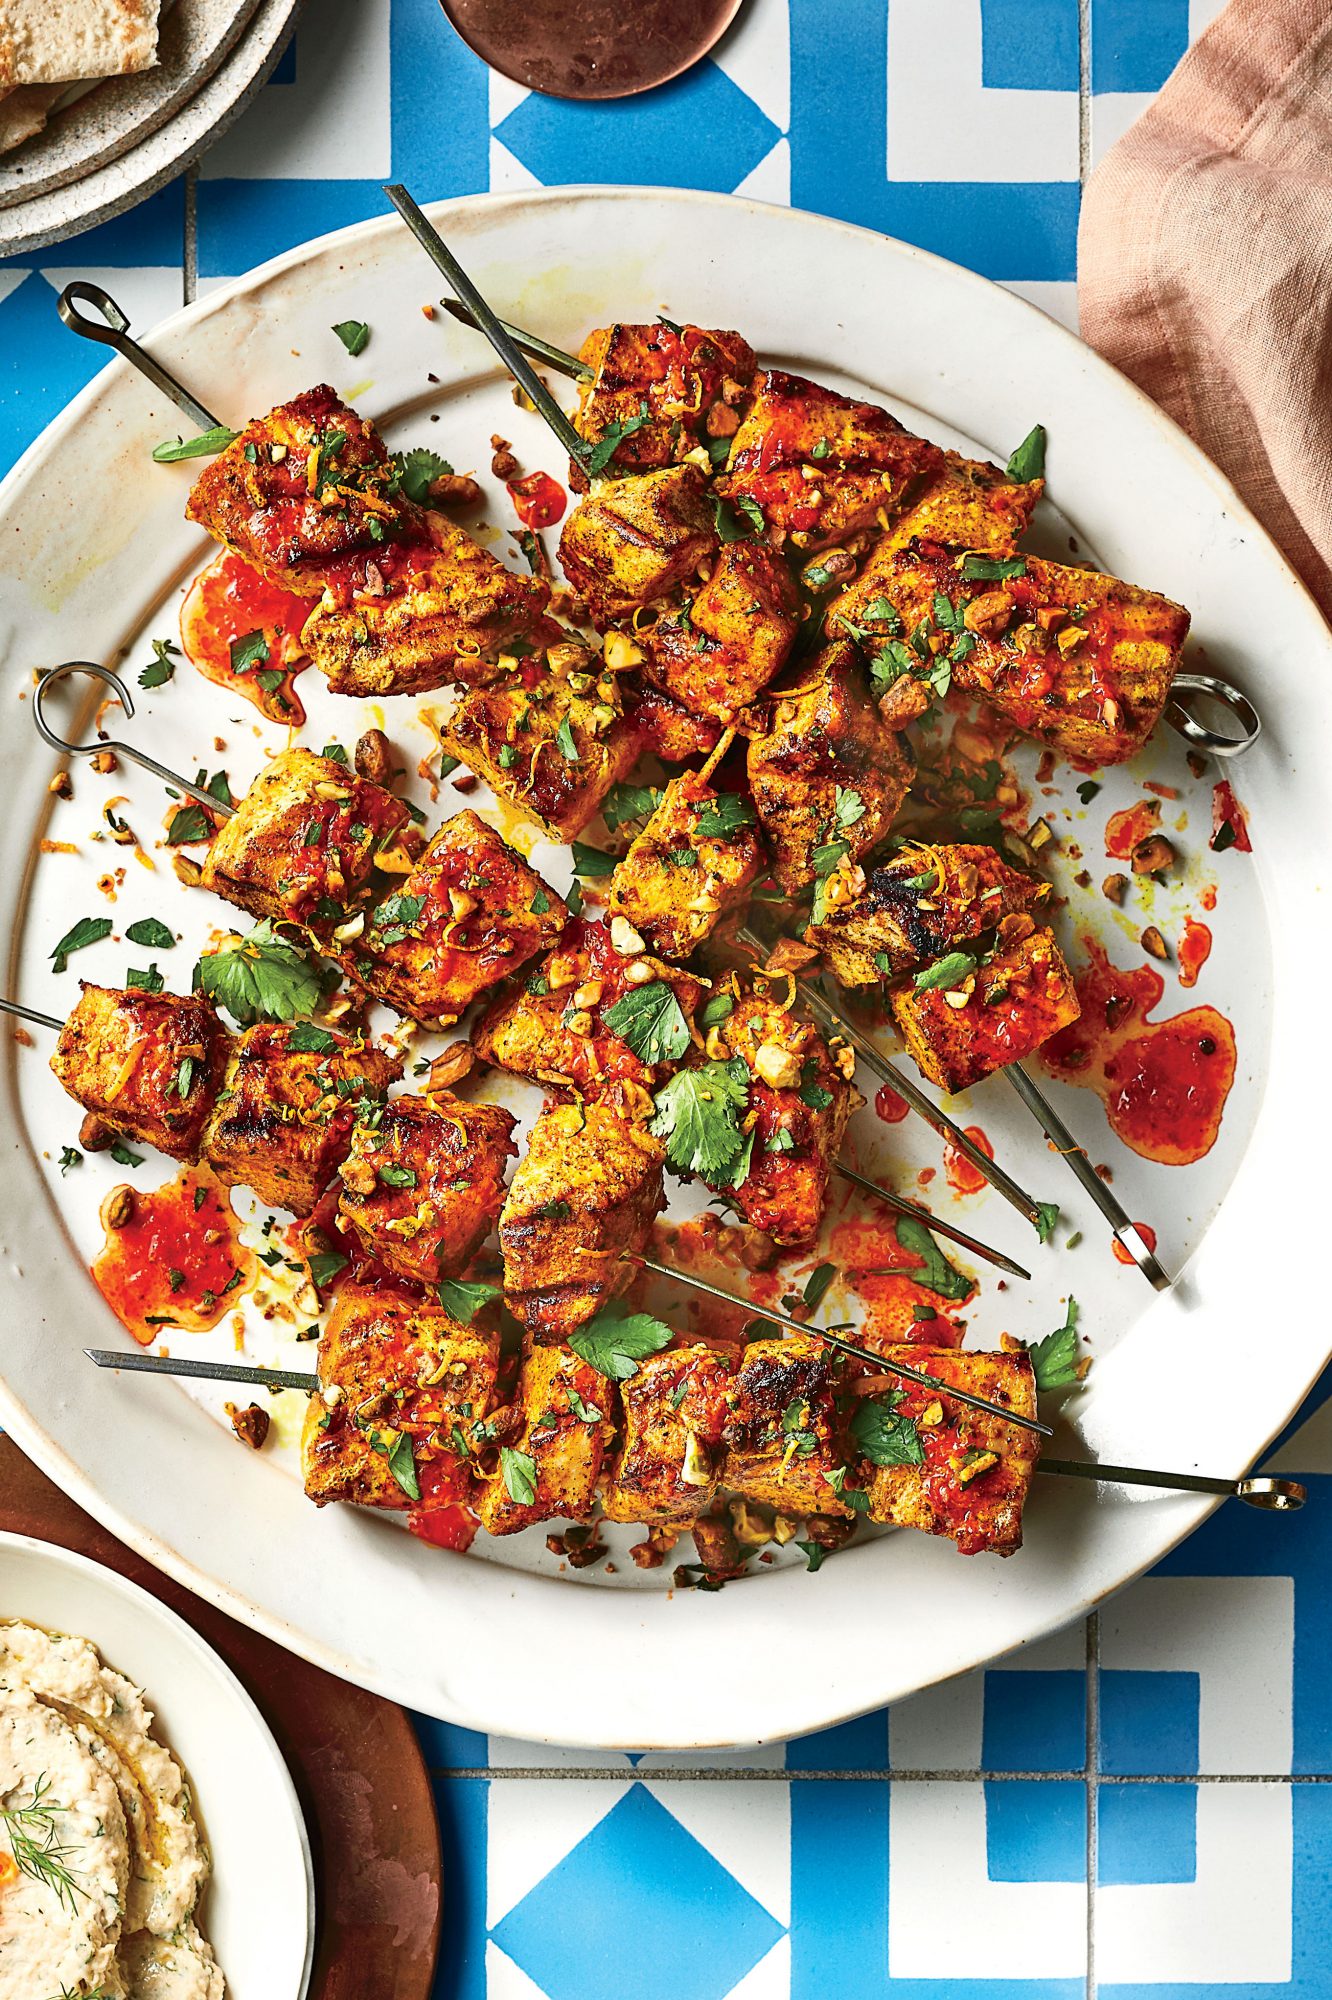 Turmeric-Marinated Swordfish Skewers with Harissa and Pistachios